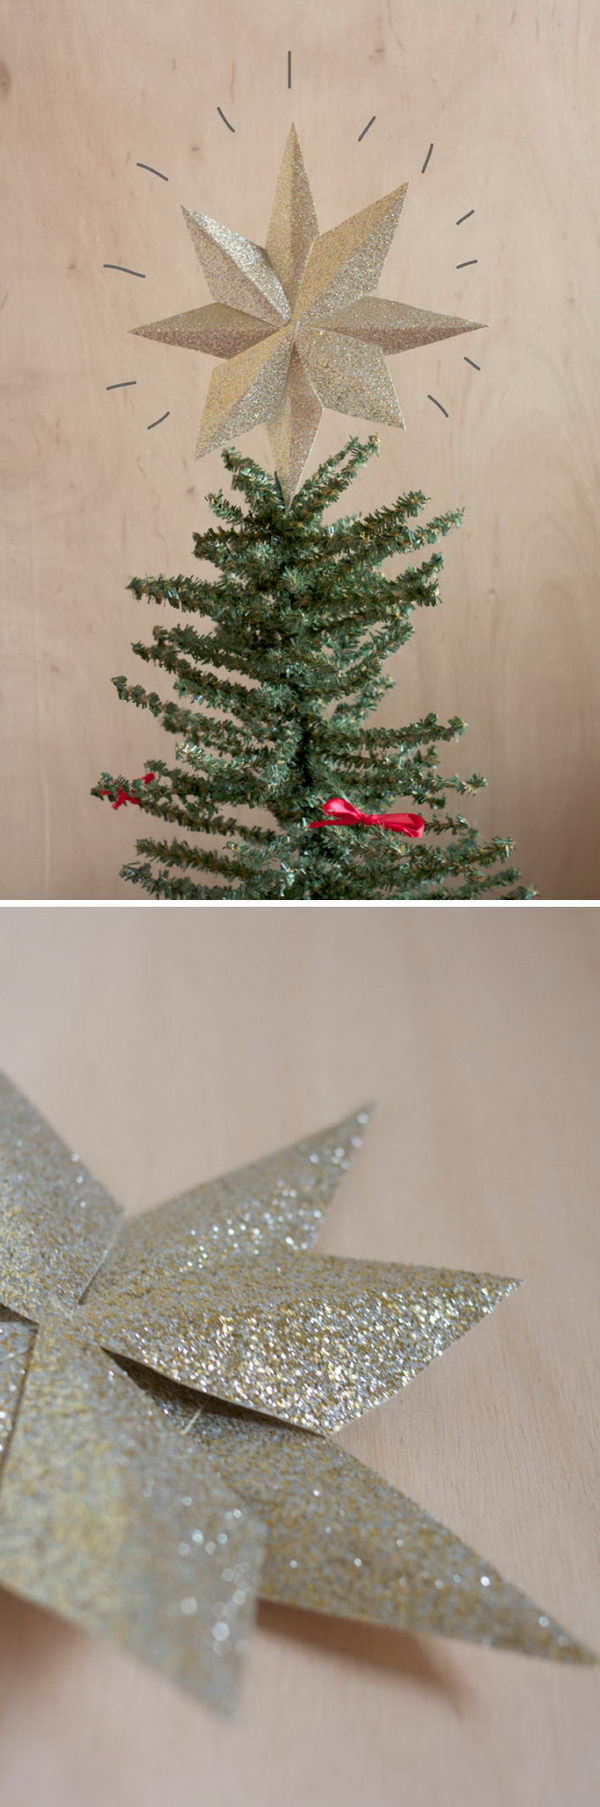 DIY Christmas Tree Toppers
 Awesome DIY Christmas Tree Topper Ideas & Tutorials Hative